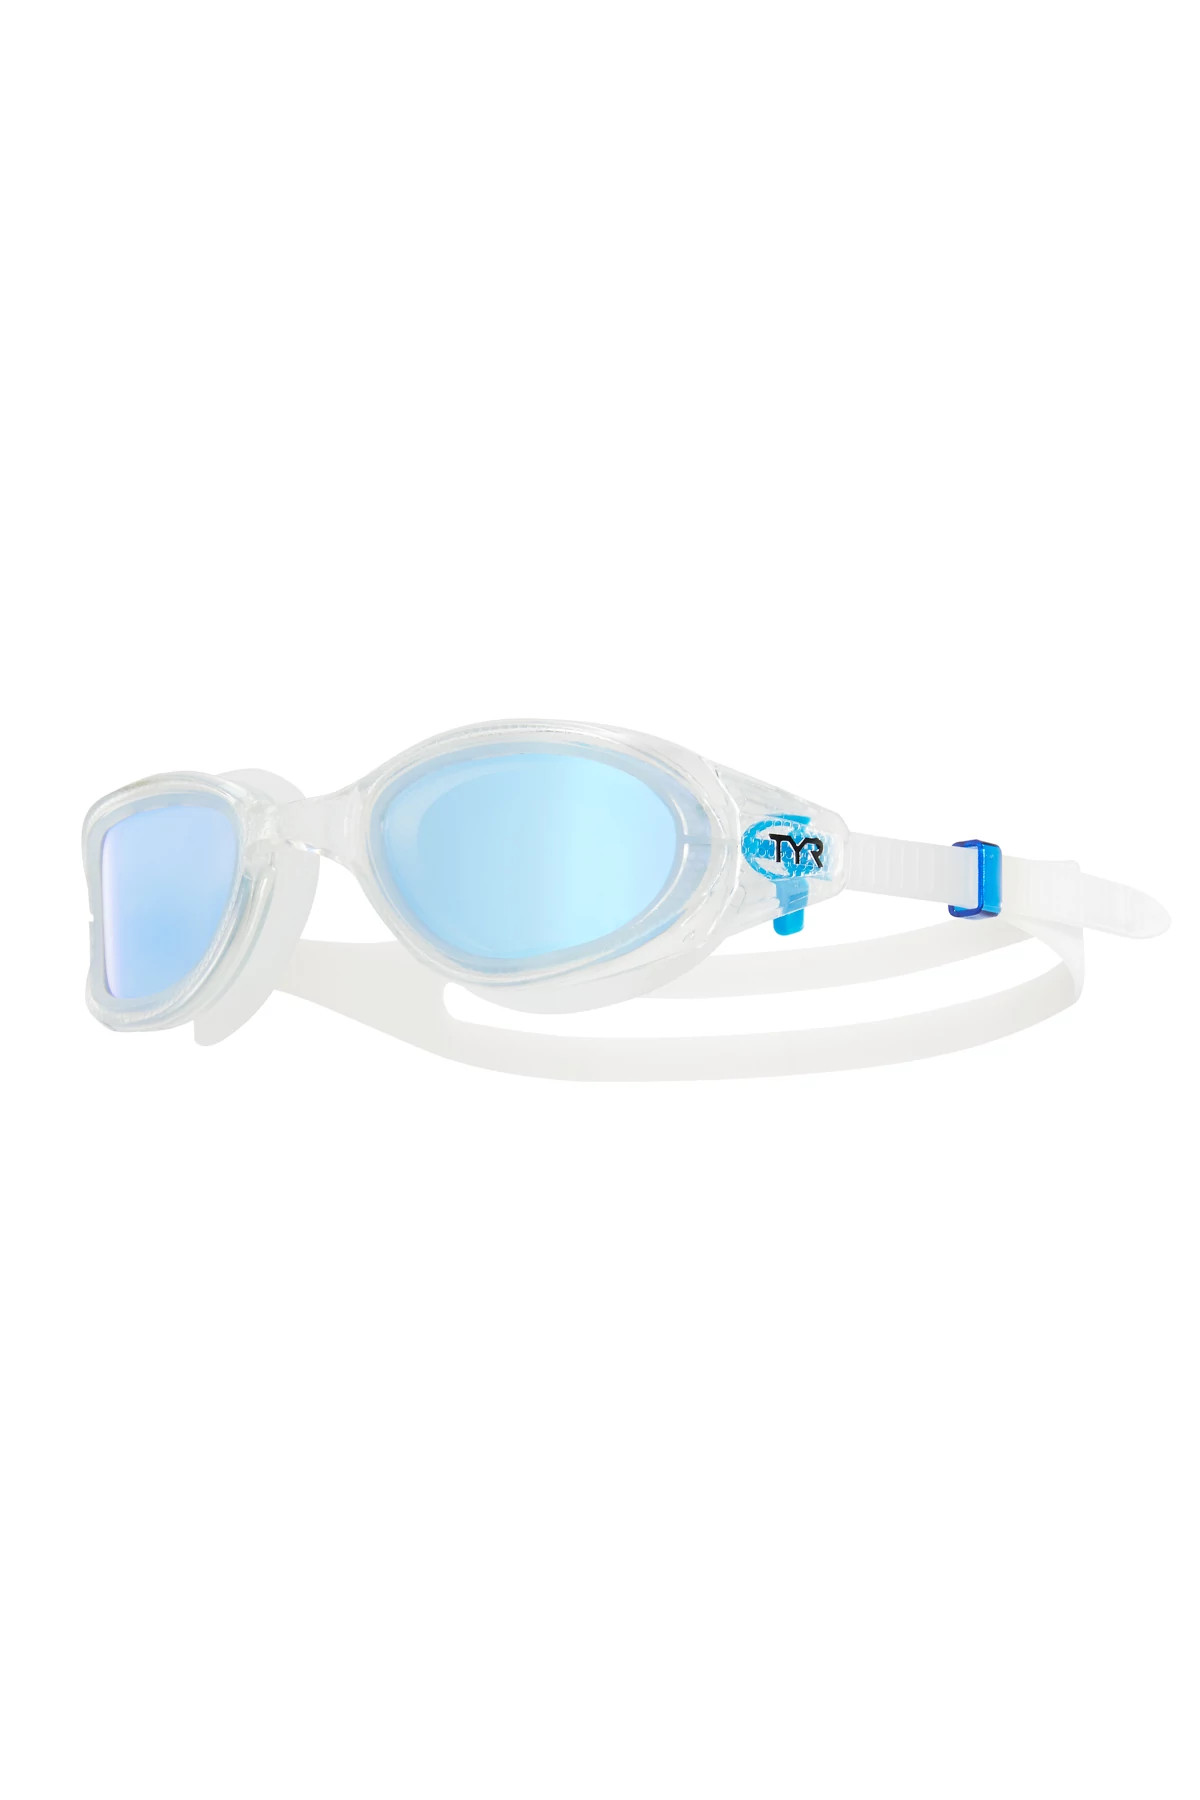 BLUE Special Ops 3.0 Polarized Swim Goggles image number 1